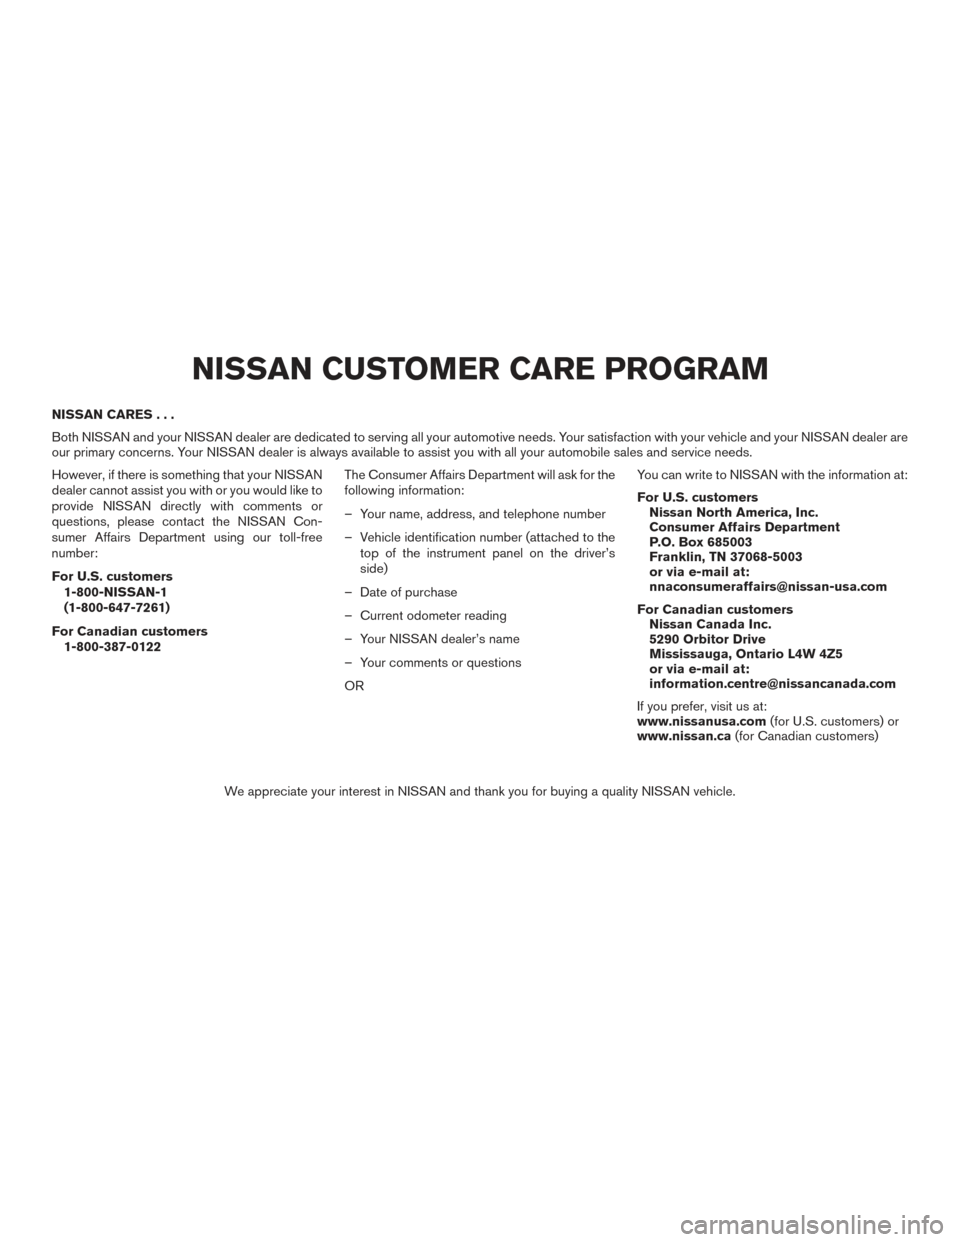 NISSAN VERSA SEDAN 2015 2.G Owners Manual NISSAN CARES...
Both NISSAN and your NISSAN dealer are dedicated to serving all your automotive needs. Your satisfaction with your vehicle and your NISSAN dealer are
our primary concerns. Your NISSAN 